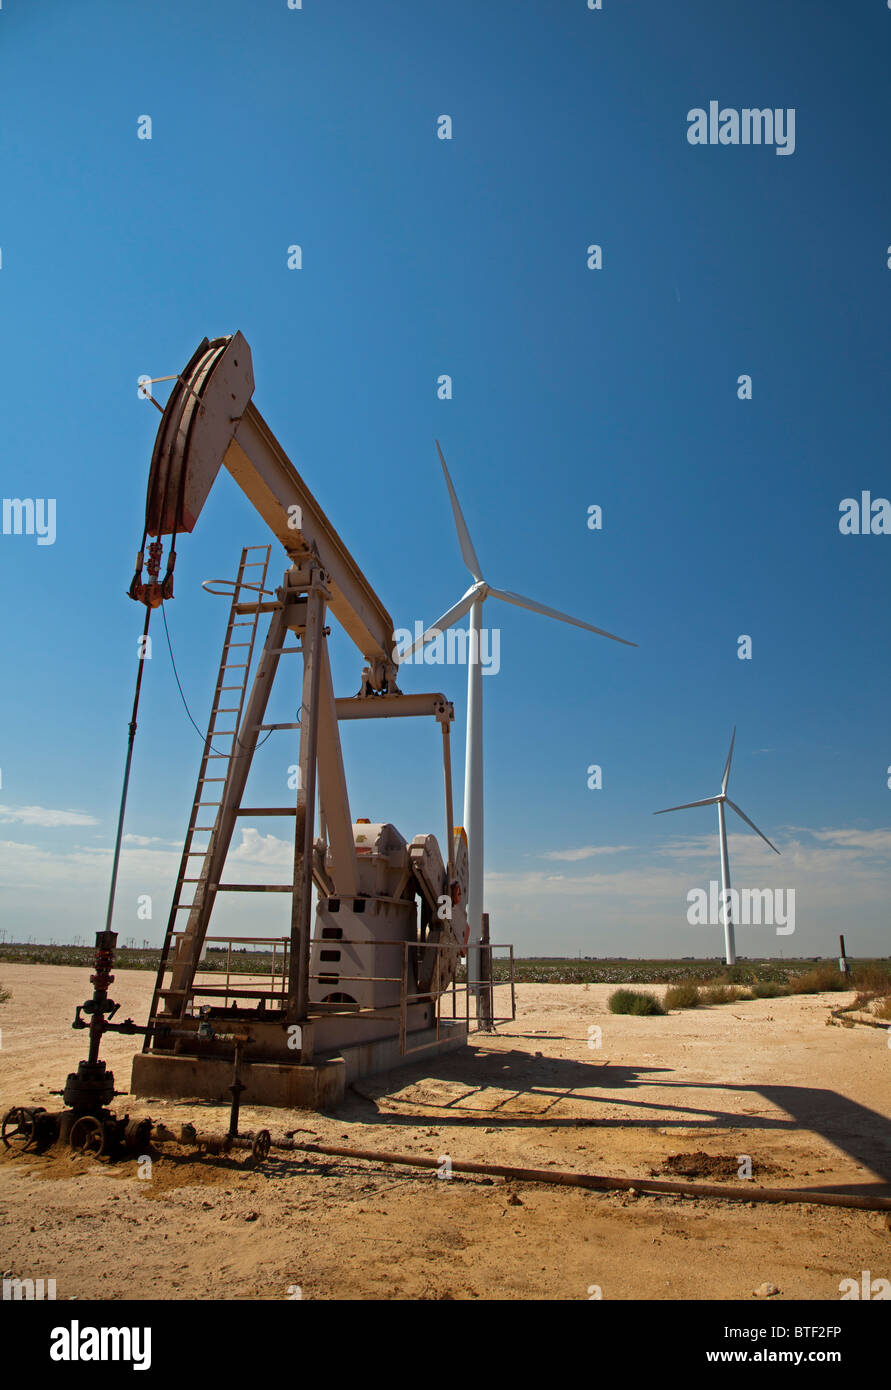 Stanton, Texas - An oil well and wind turbines in west Texas. Stock Photo